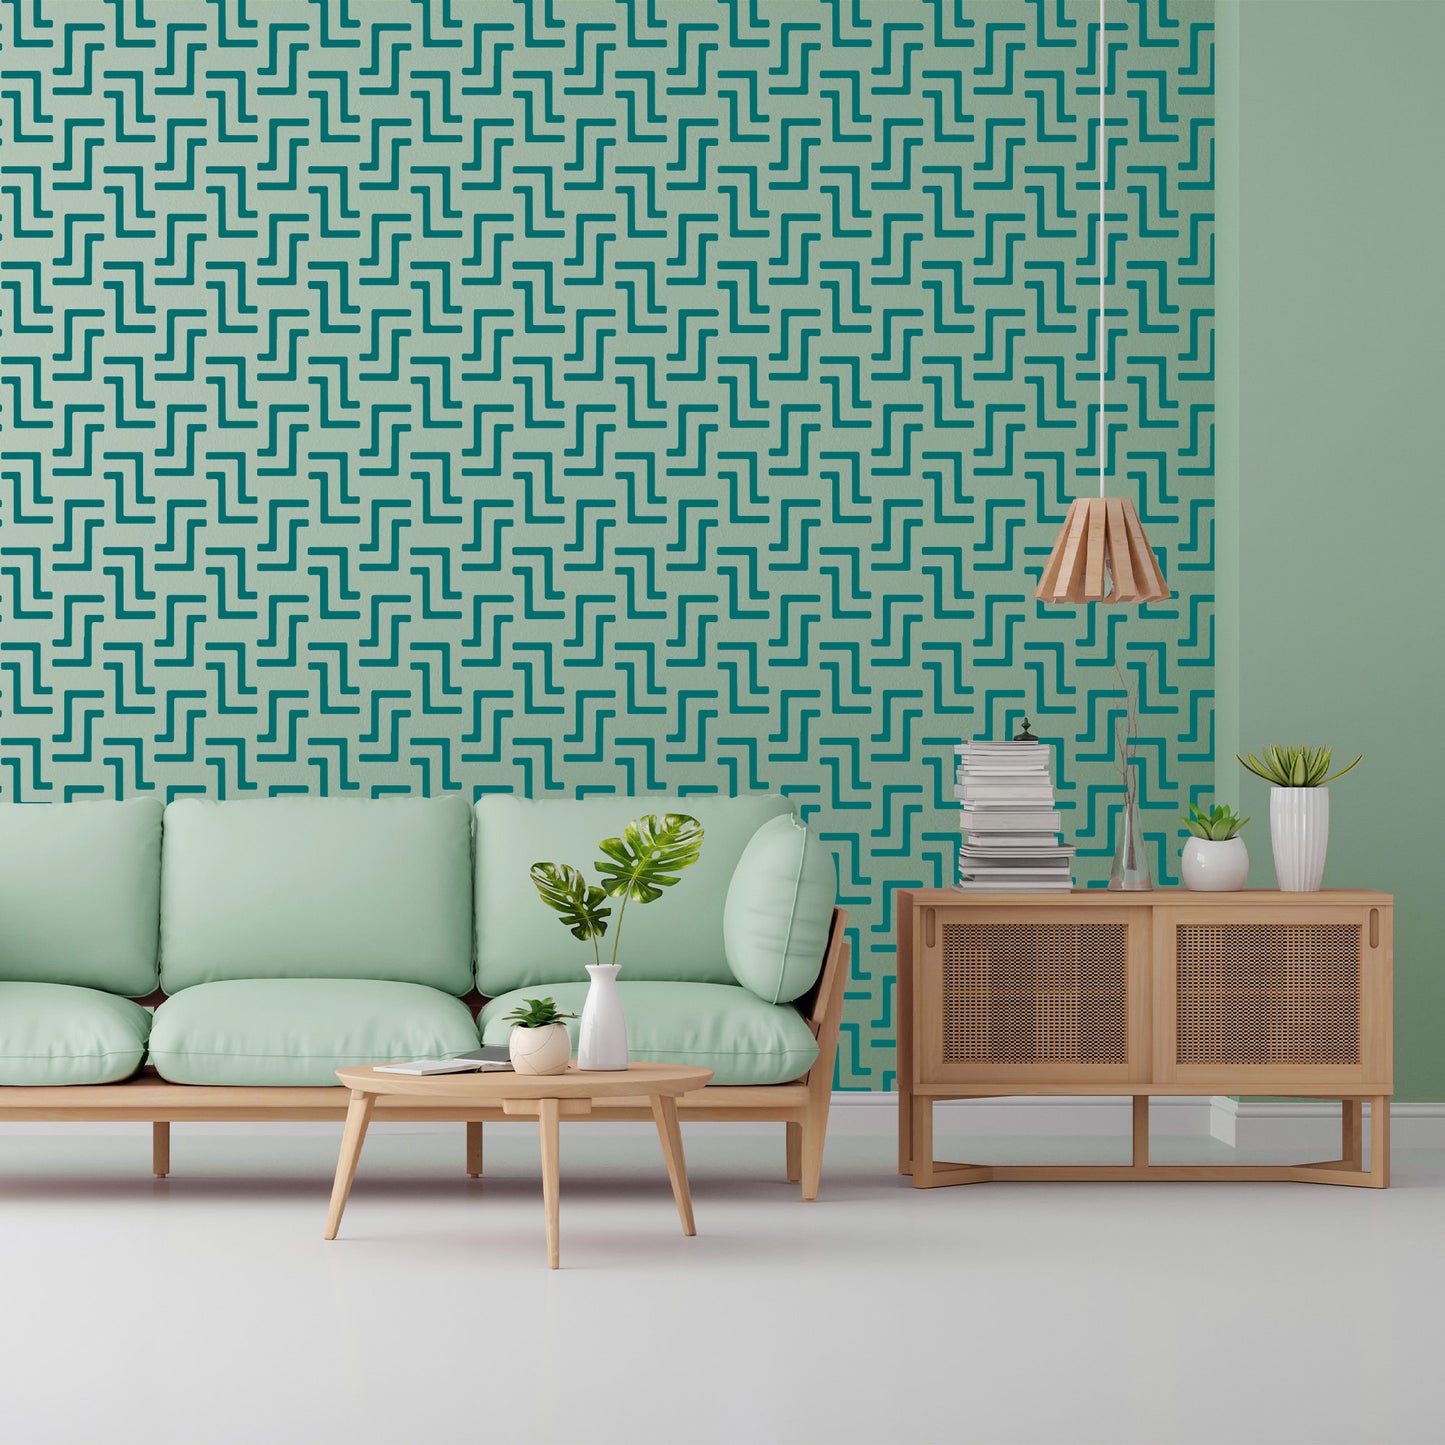 Fret Pattern Design Stencil for Wall Painting (KDMD1447)